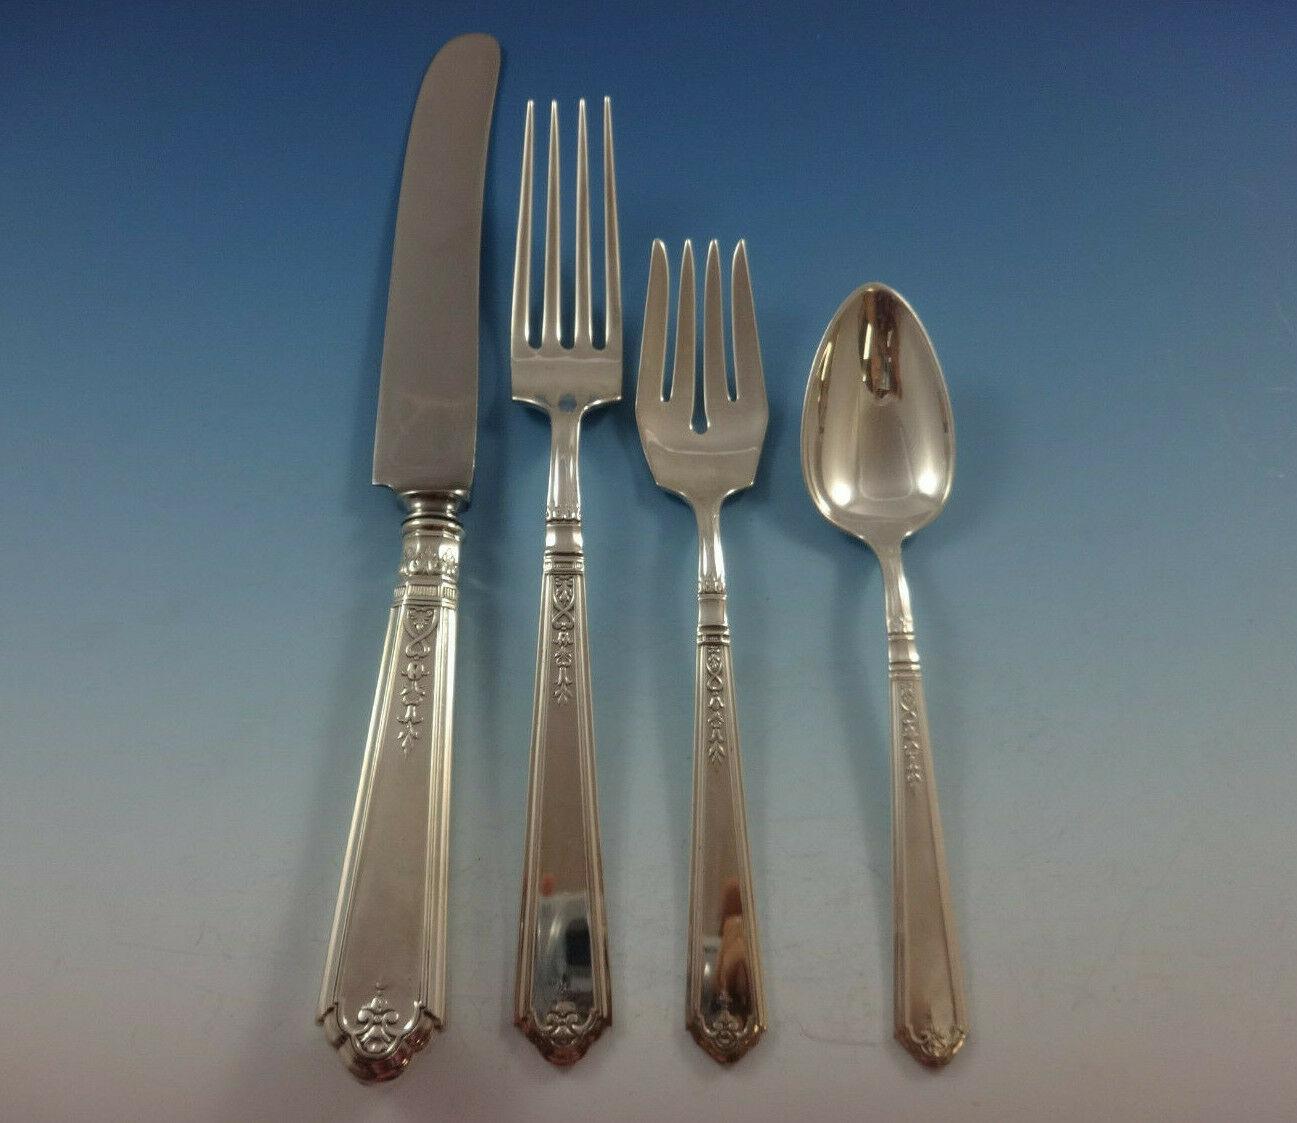 Beautiful Princess Patricia by Durgin / Gorham sterling silver dinner size flatware set of 36 pieces. This set includes:

6 dinner size knives, 9 5/8